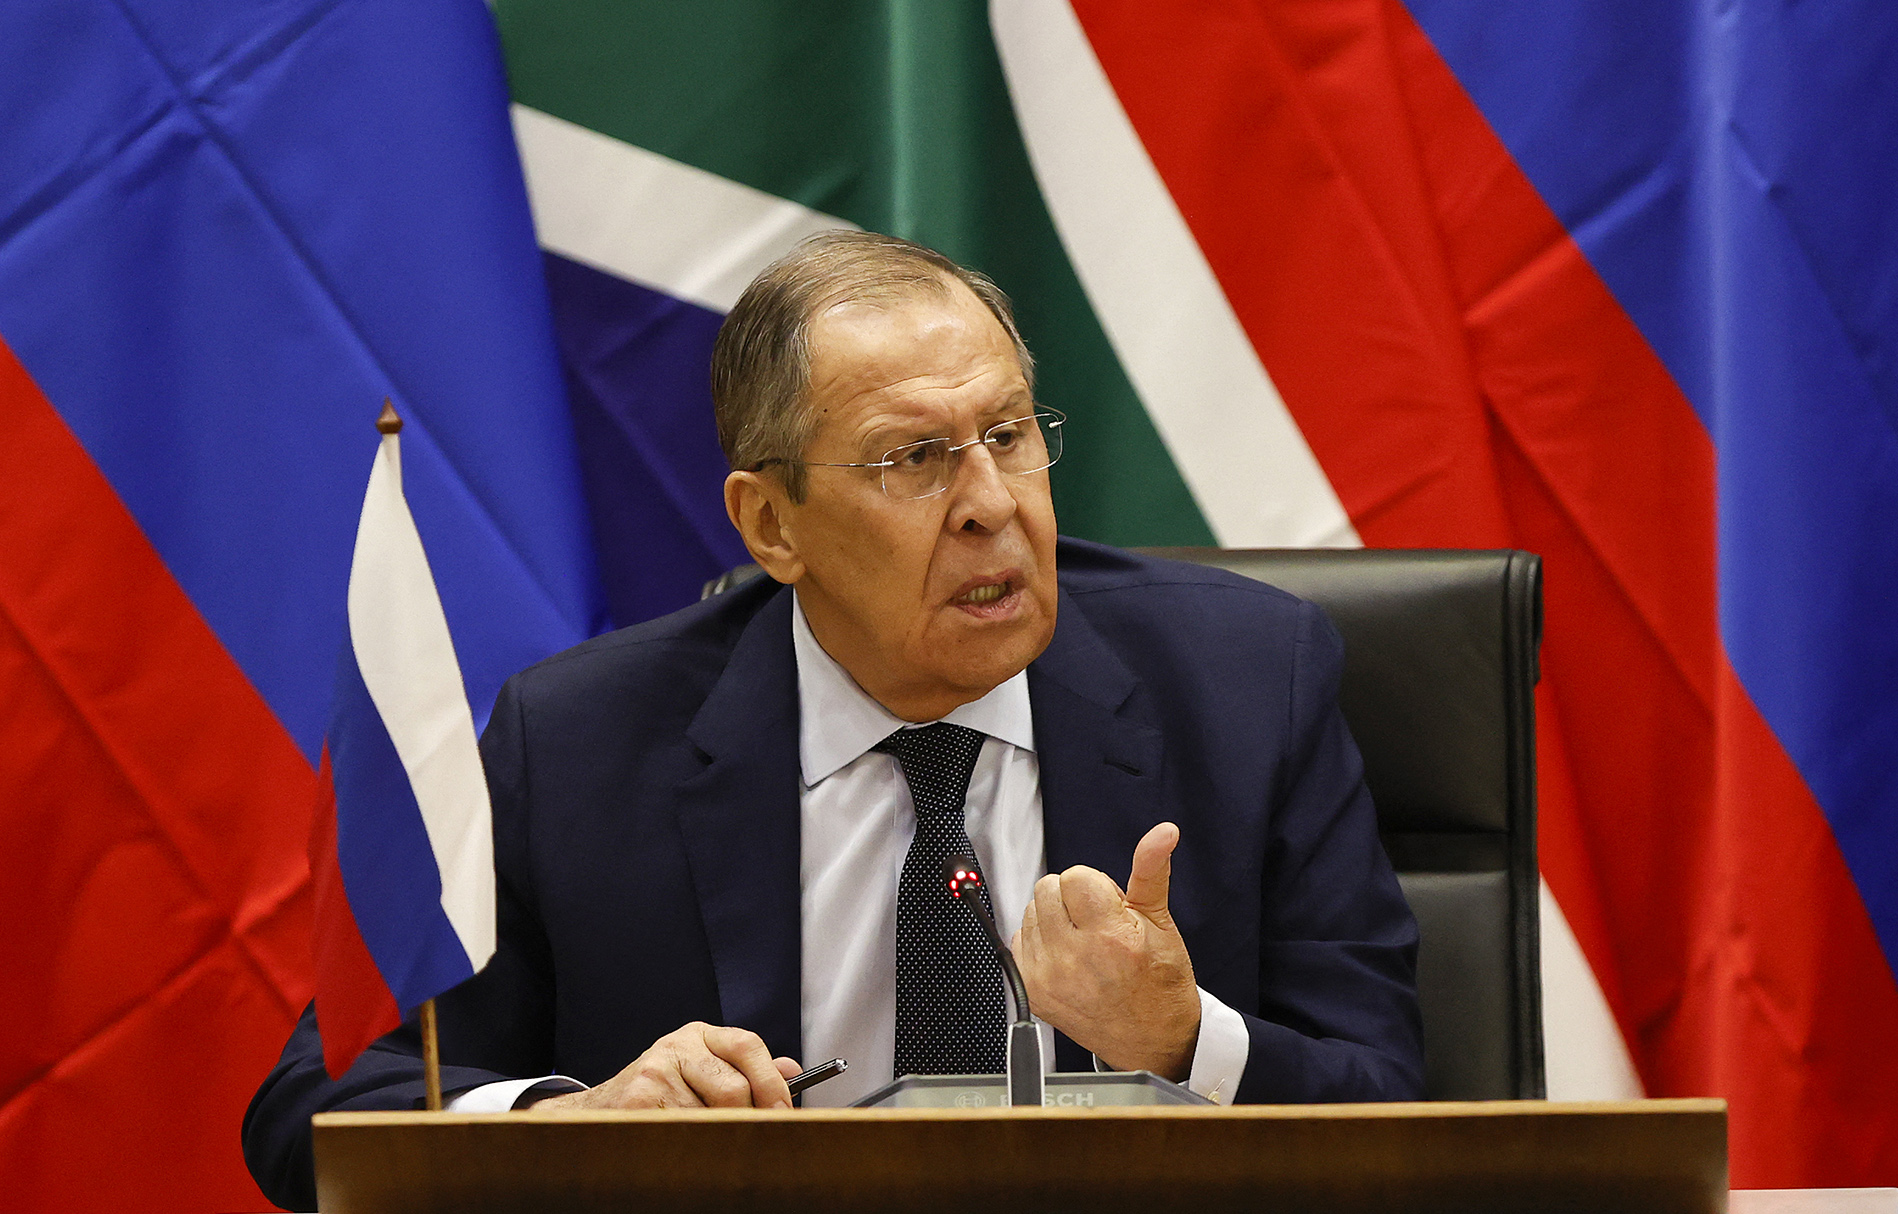 Russian Minister of Foreign Affairs of Sergei Lavrov speaks during a press conference after his meeting with South African Minister of International Relations and Cooperation Naledi Pandor (not seen) at the OR Tambo Building in Pretoria on January 23, 2023. (Photo by PHILL MAGAKOE / AFP) (Photo by PHILL MAGAKOE/AFP via Getty Images)